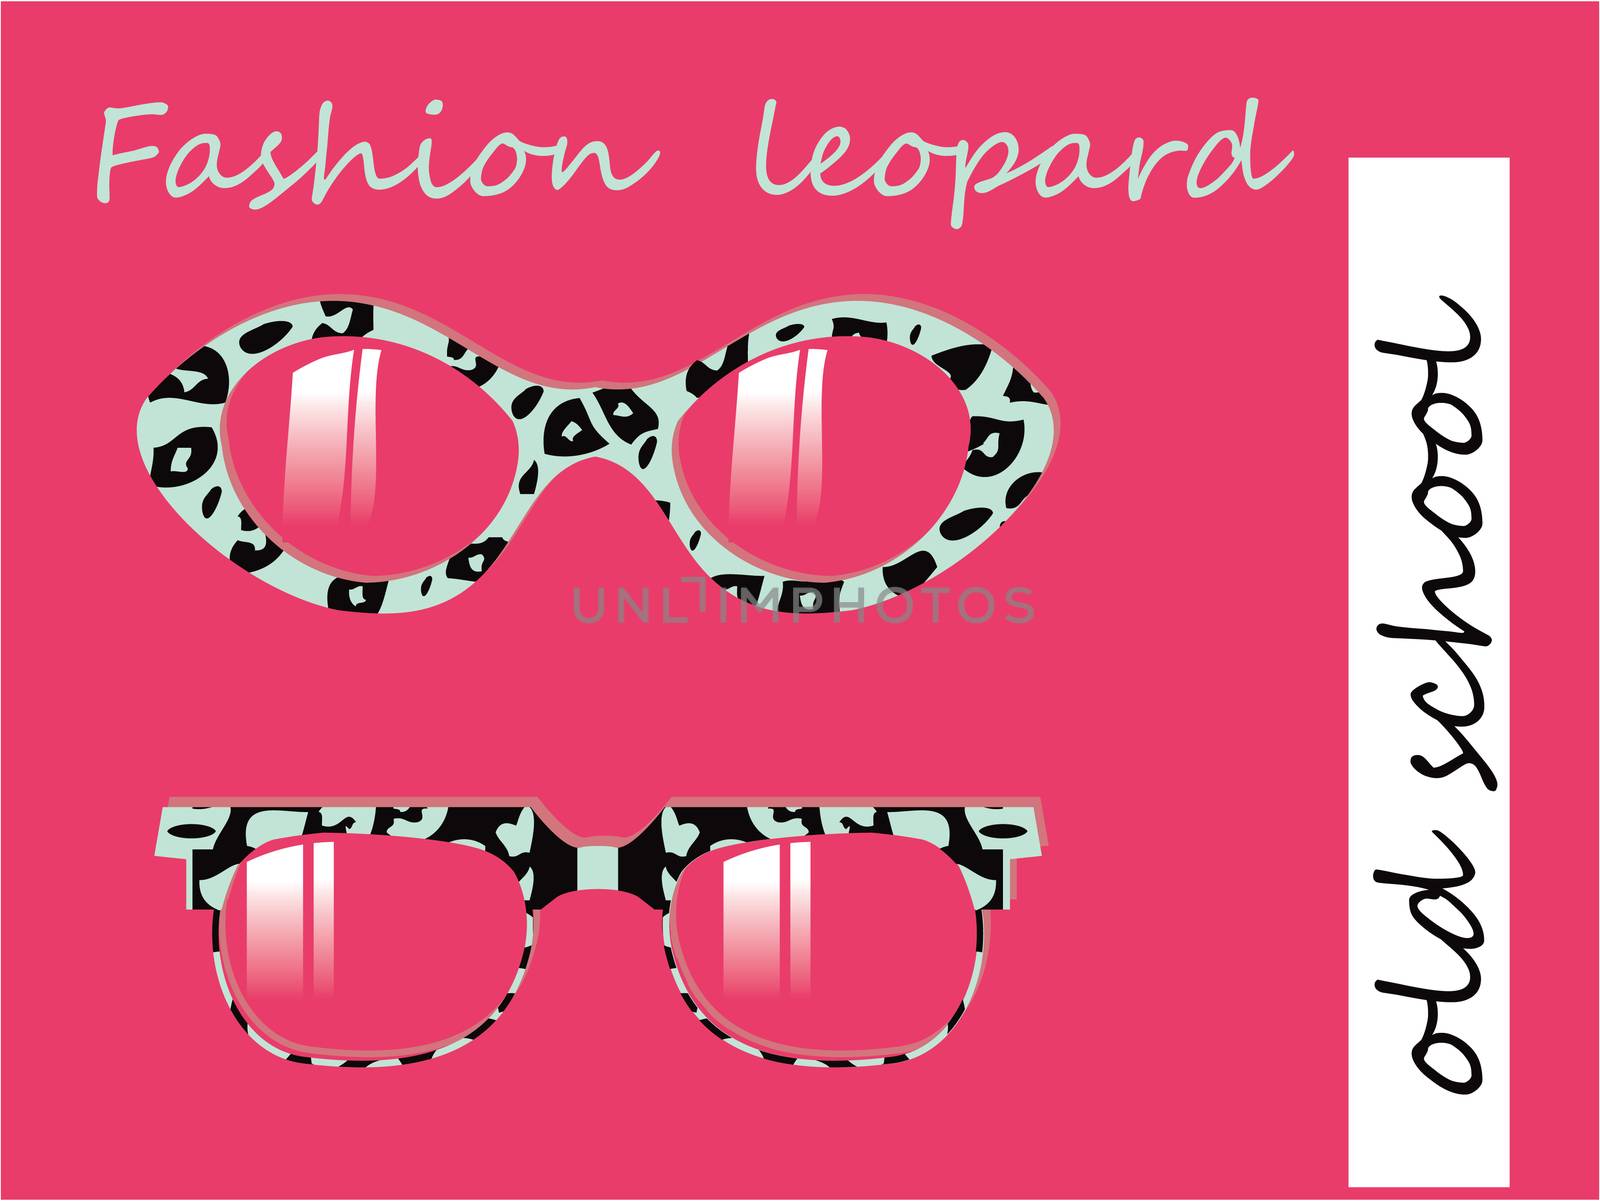 Fashion collection of oldschool glasses with leopard texture pat by tamaravector